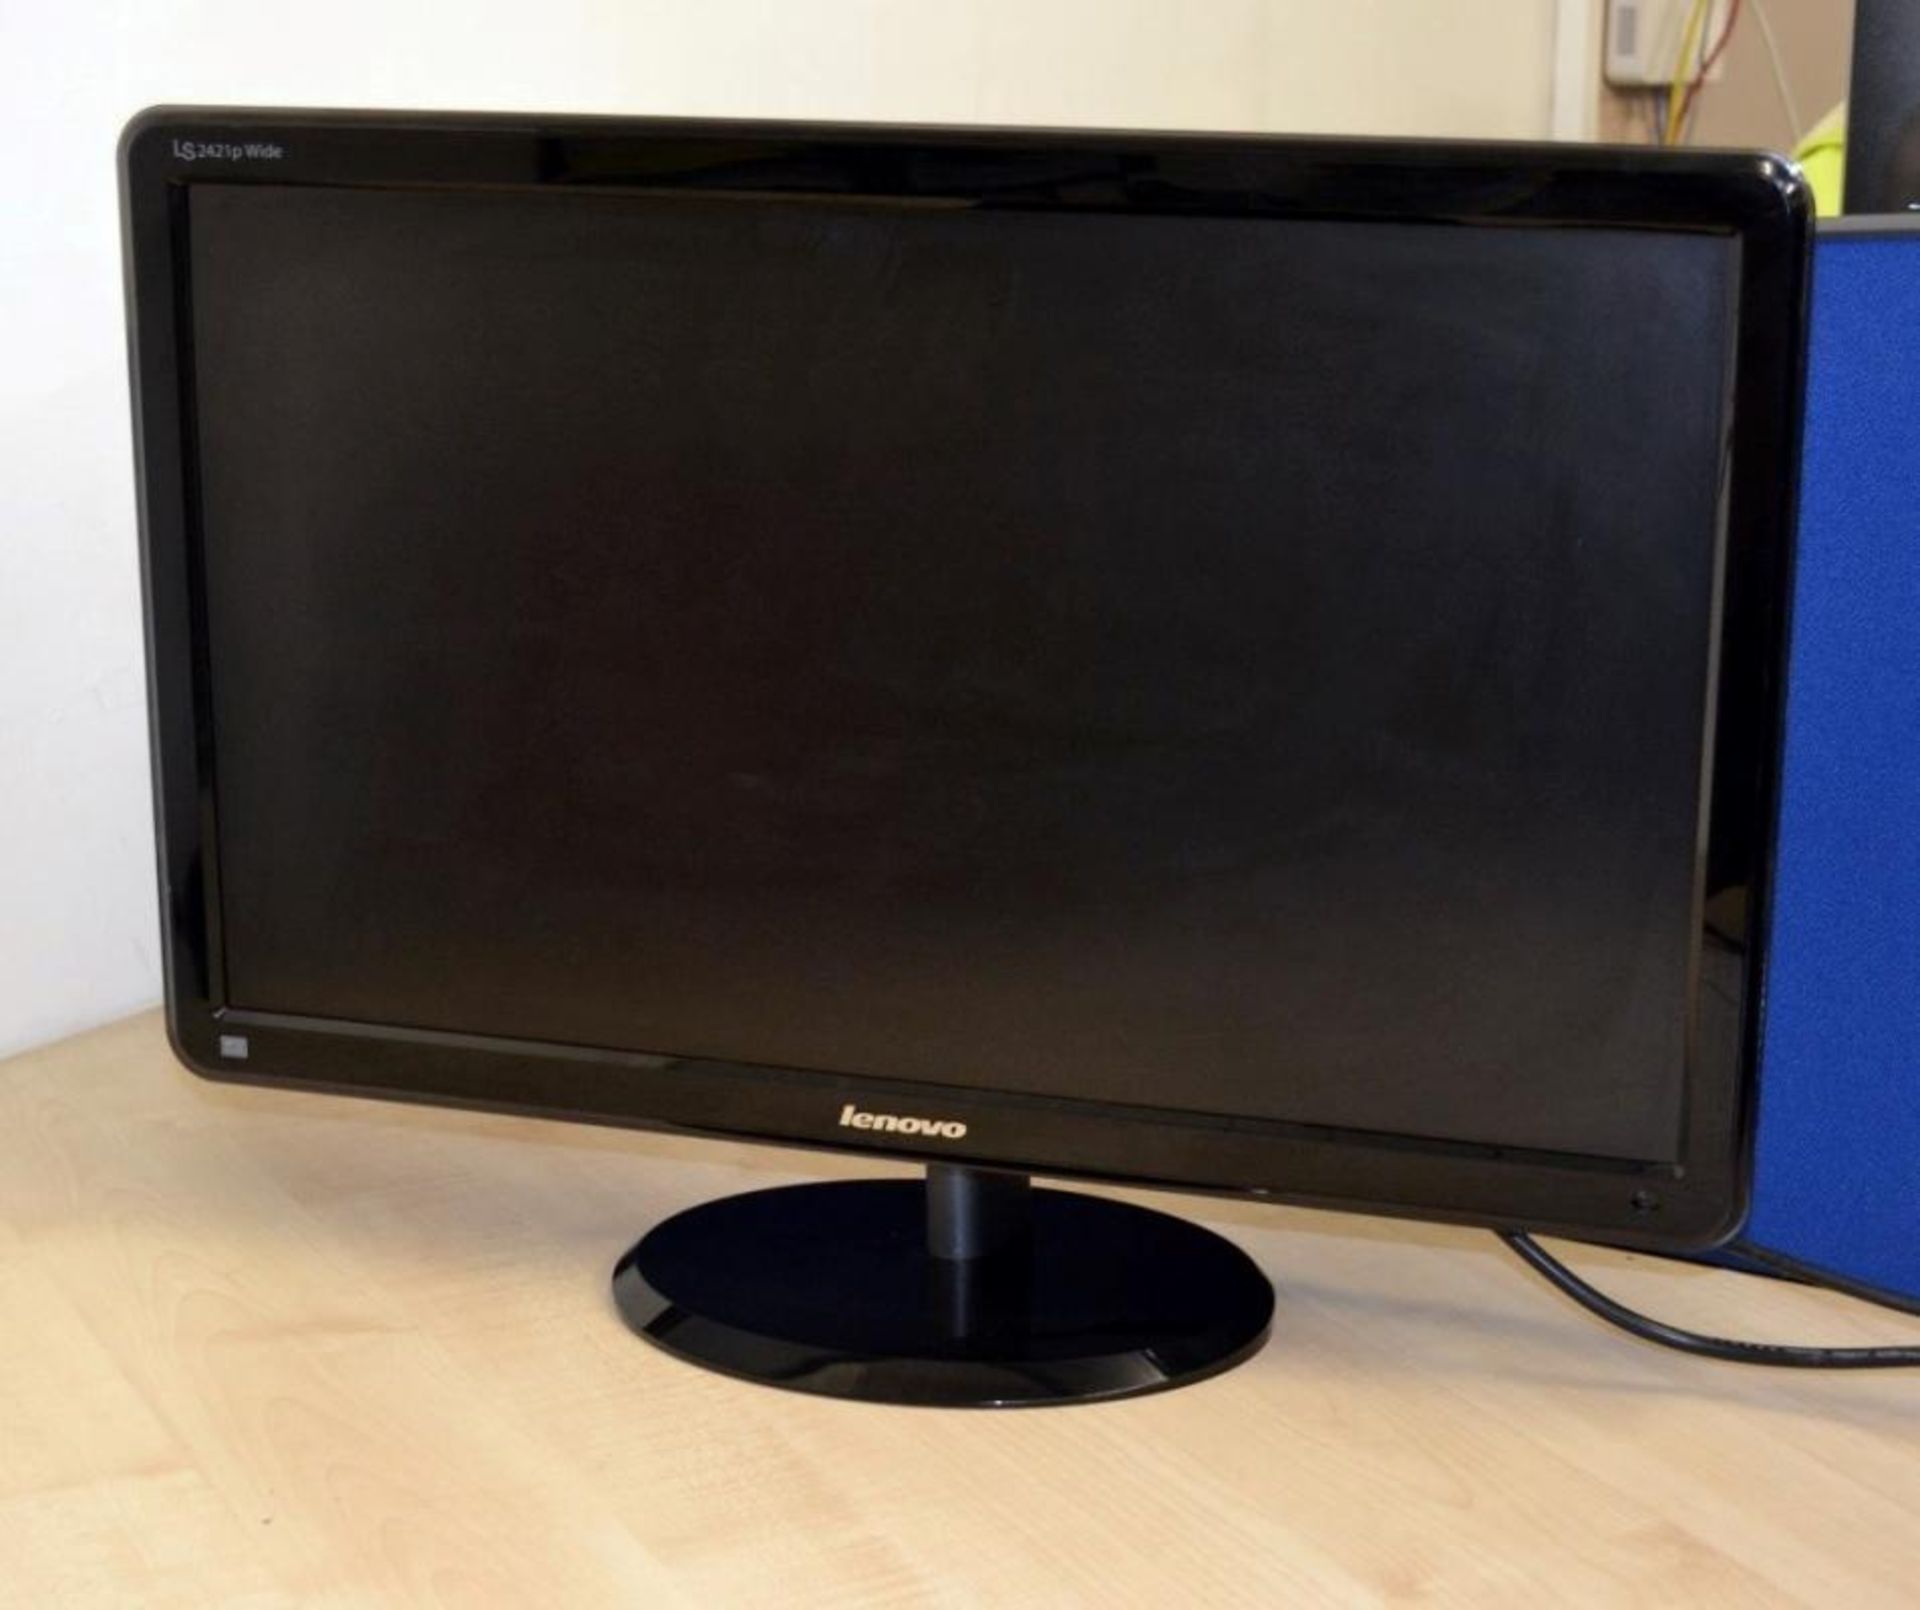 1 x Lenovo LS2421p Wide 23.6" Full HD LED TFT Monitor (Model: 4015-LS1) - Recently Taken From A Work - Image 11 of 13